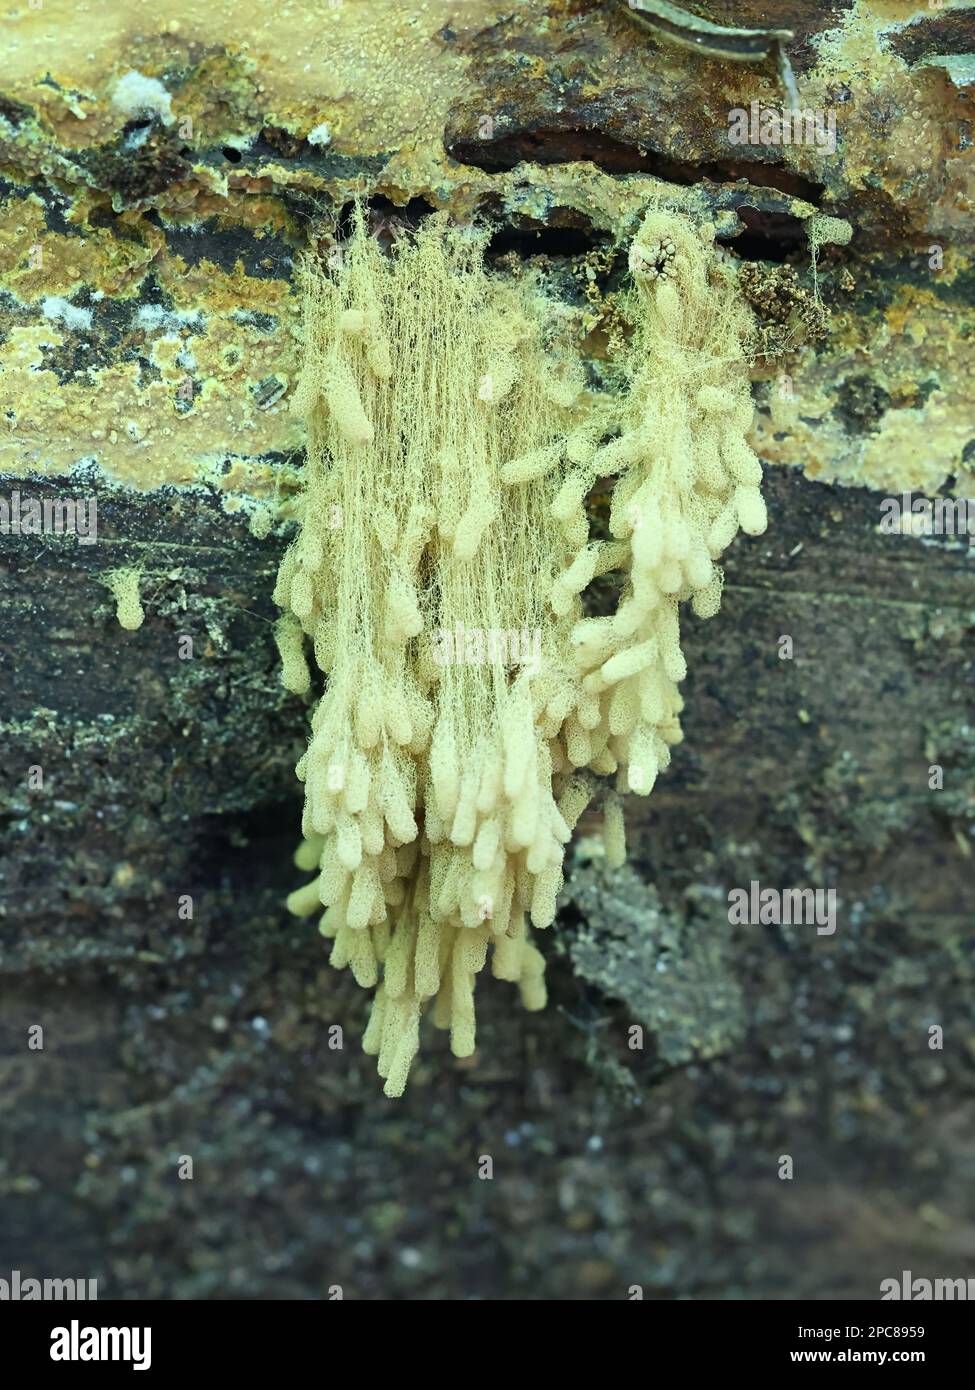 Arcyria obvelata, also called Arcyria nutans, commonly known as yellow carnival candy slime mold Stock Photo